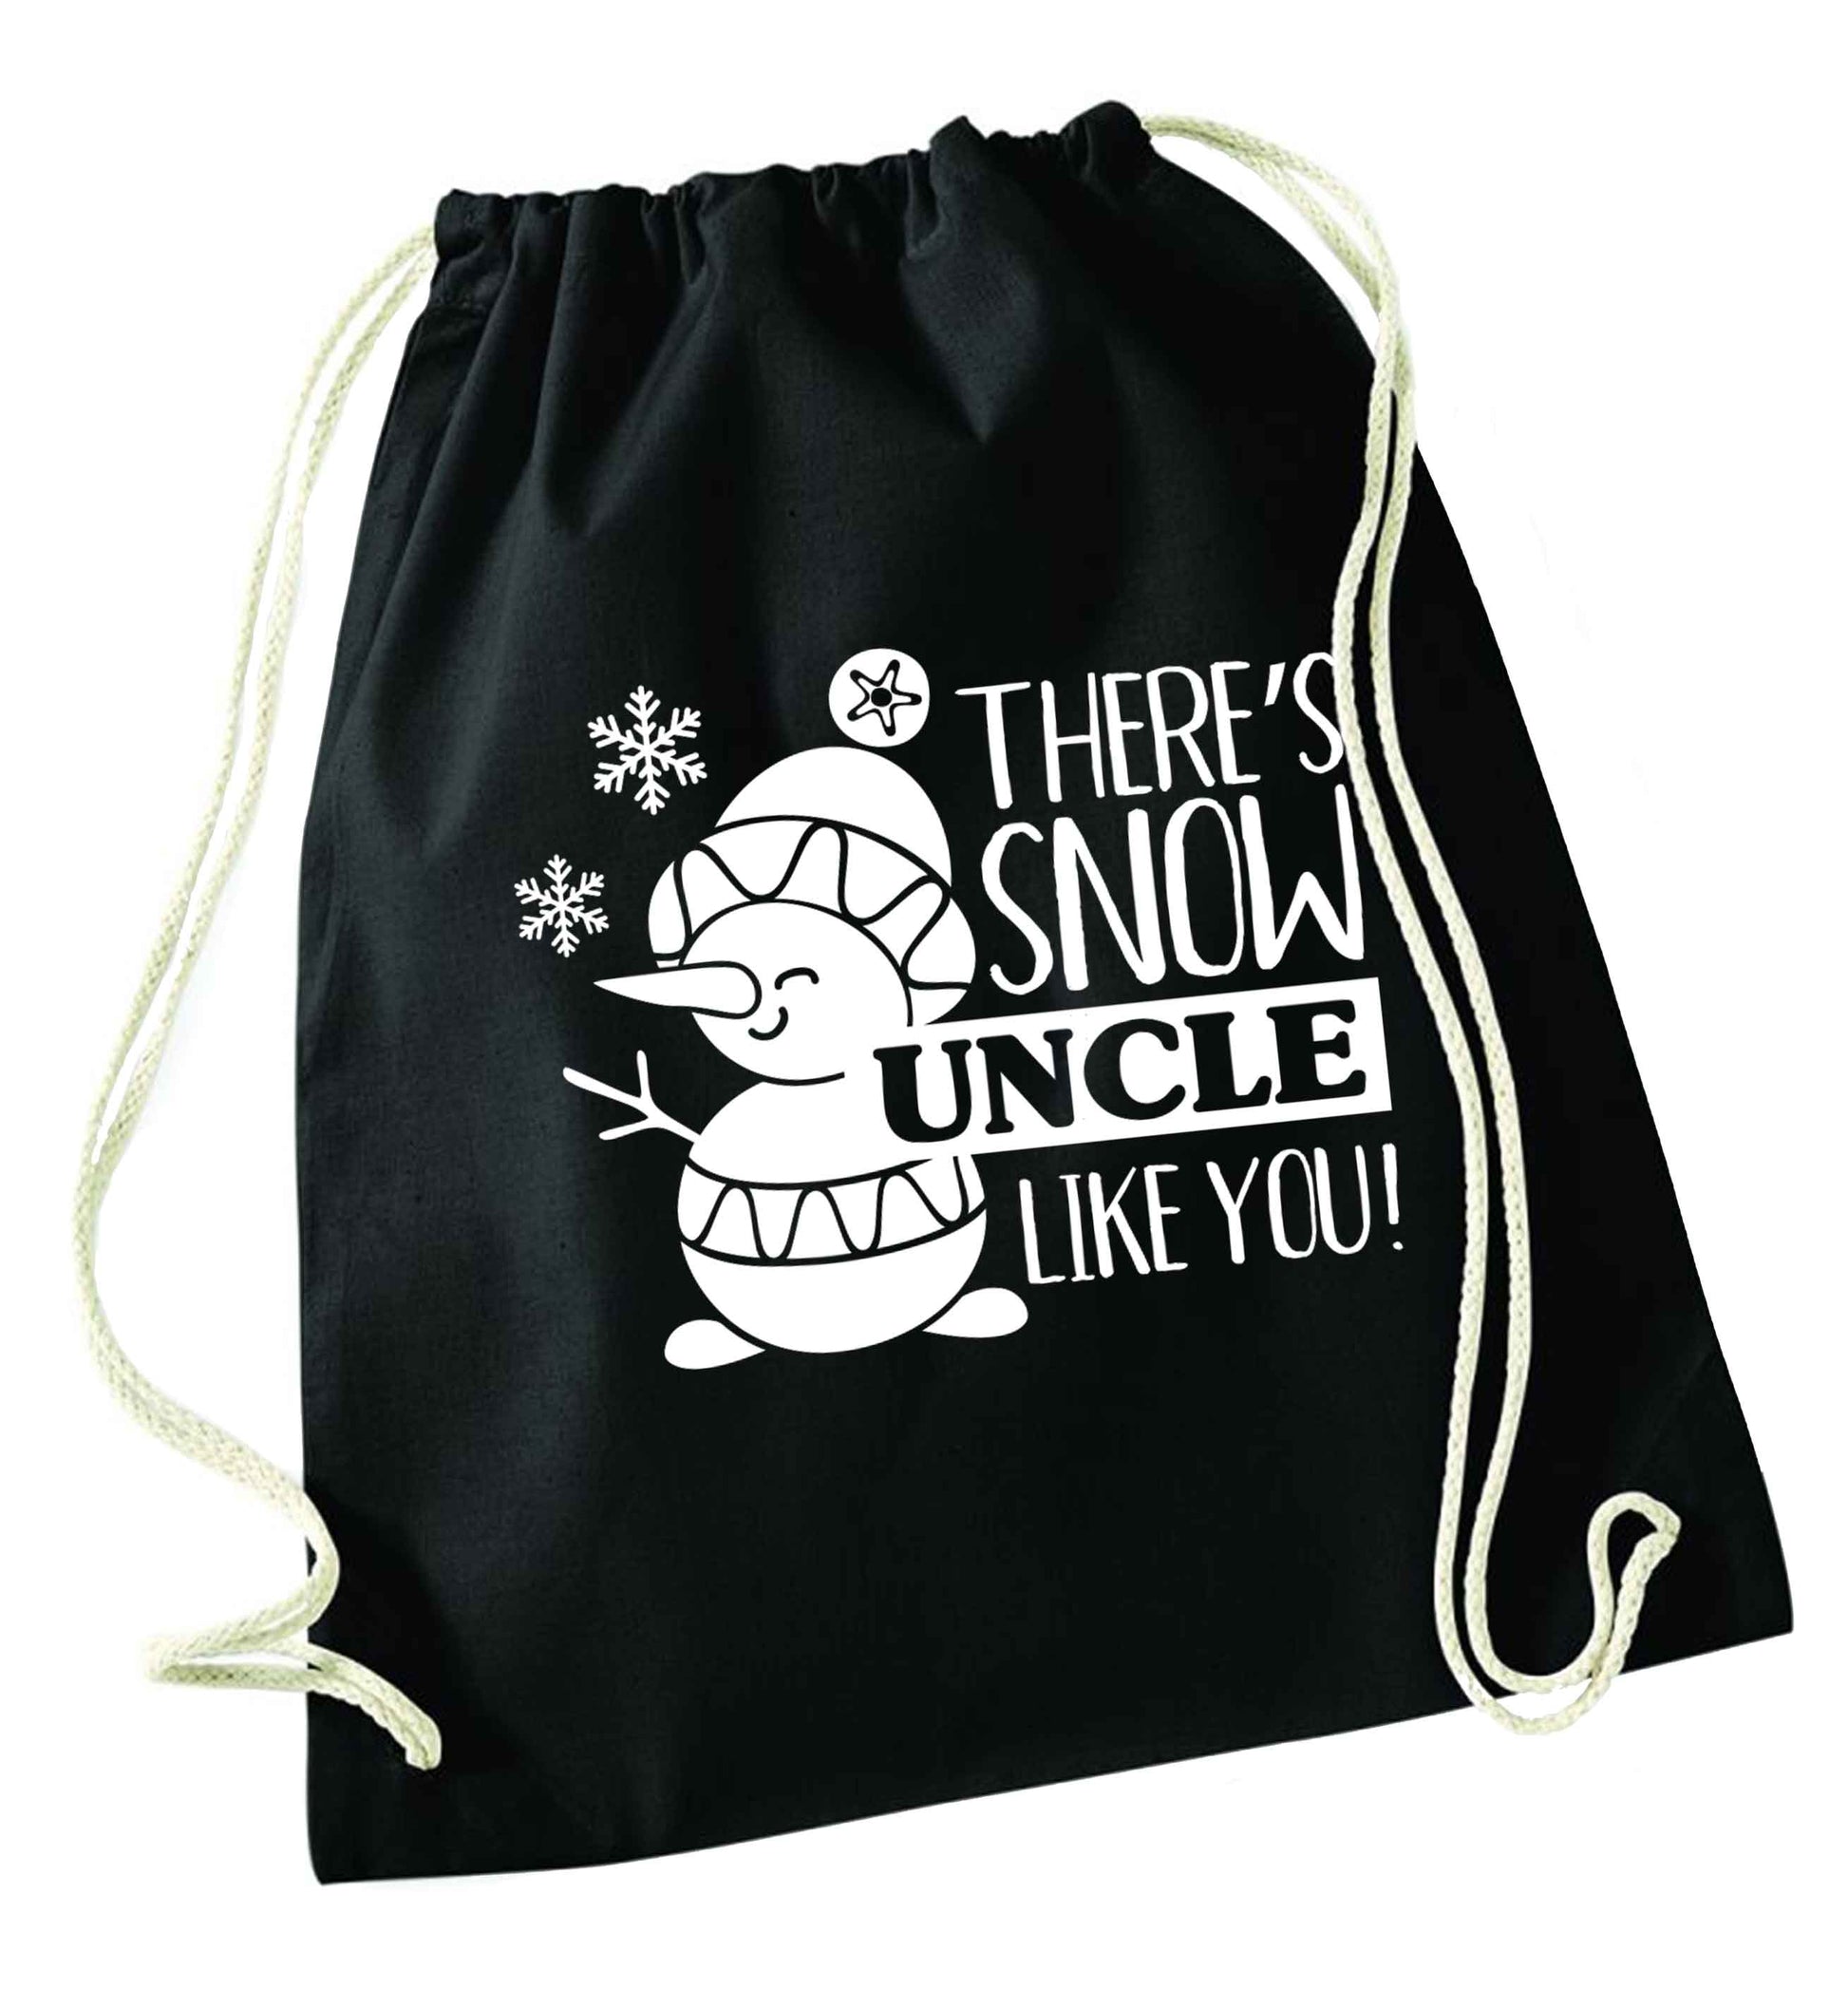 There's snow uncle like you black drawstring bag